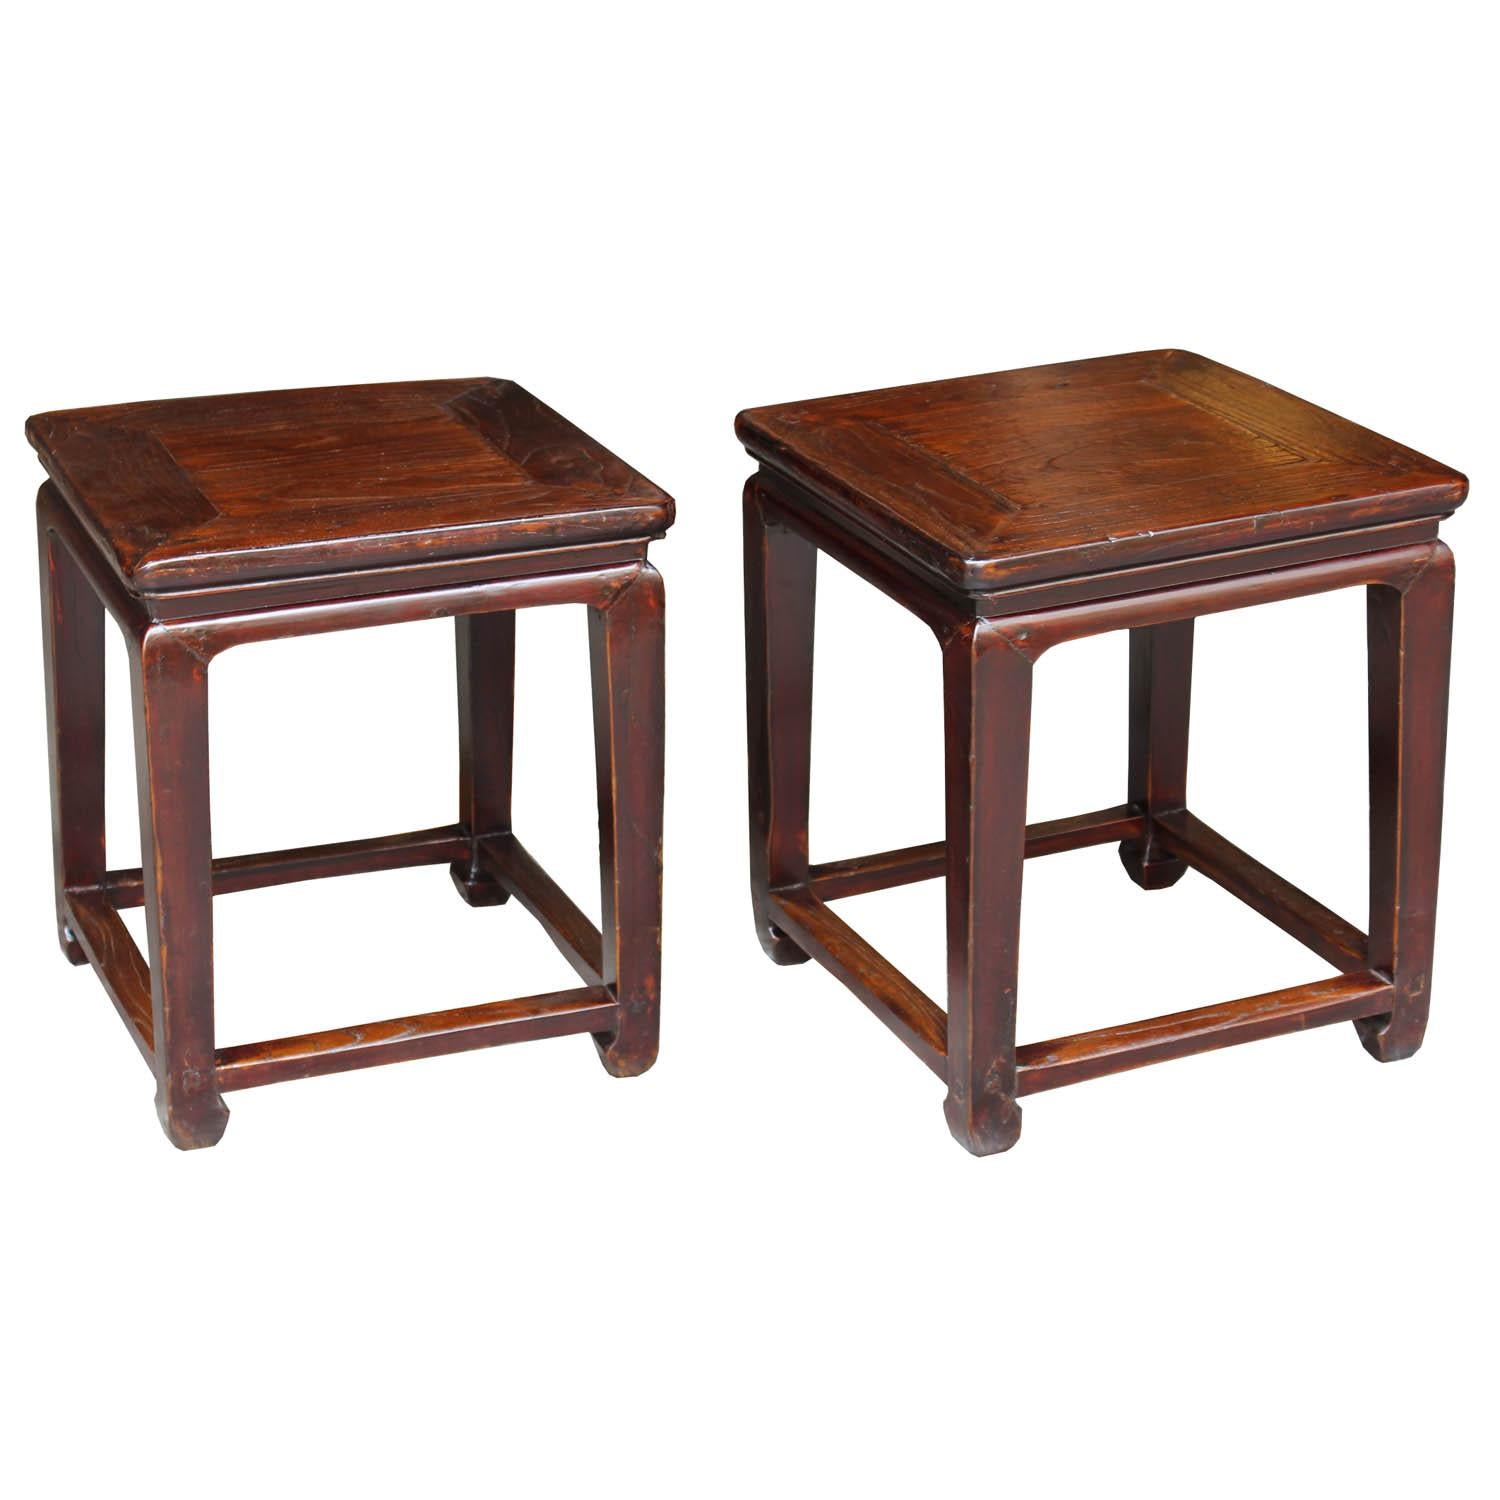 Elm Ming style side table with beautiful elm grain has a recessed top, bottom support bars and elegant horse-hoof style feet. Versatile to use as coffee tables in front of a sofa or as side tables next to armchairs.